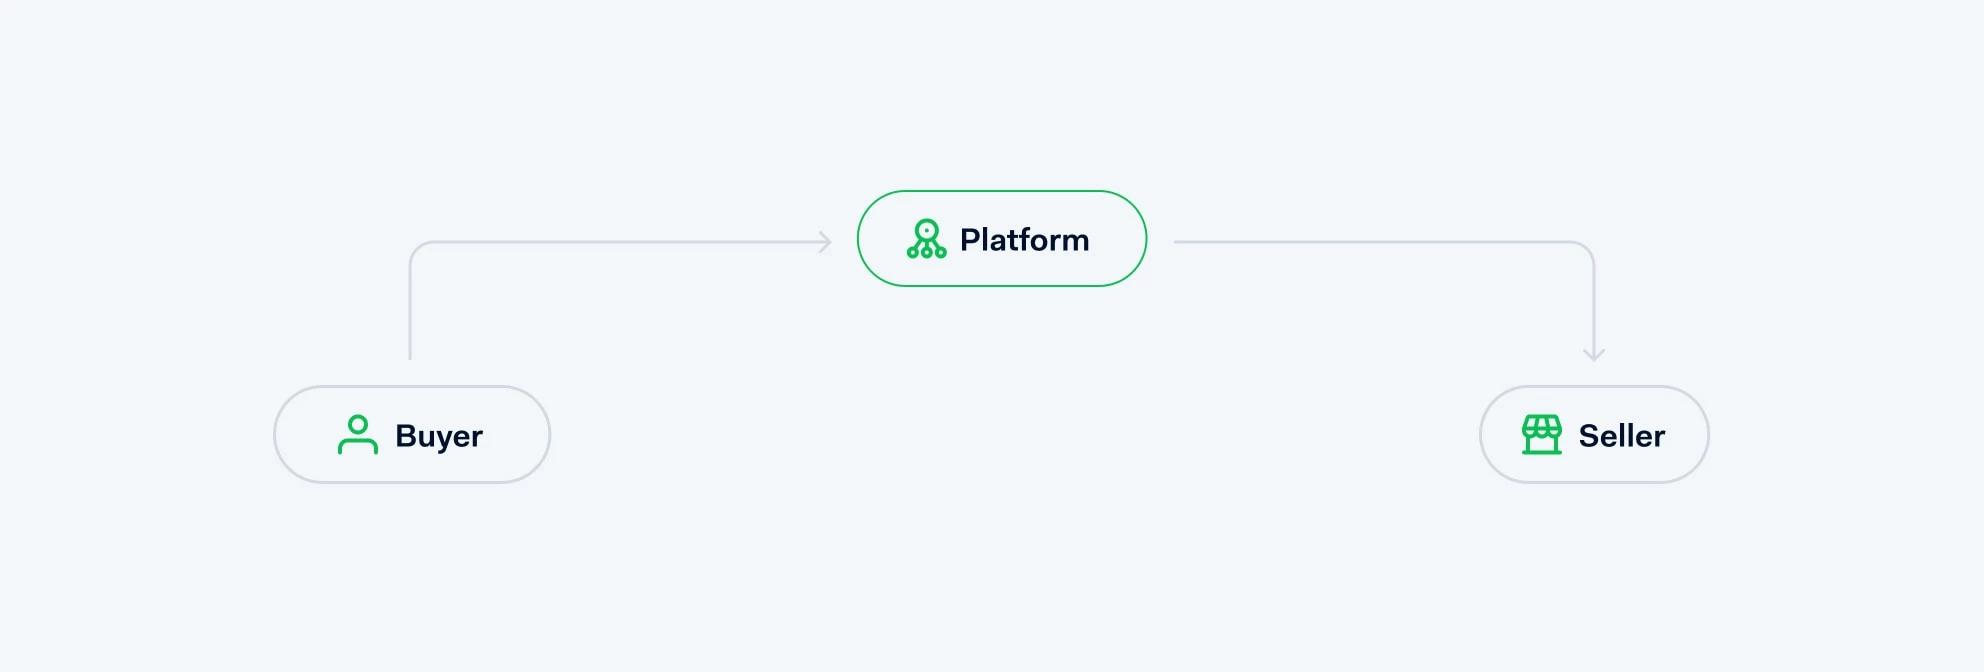 Funds flow from Buyer to Platform to Seller